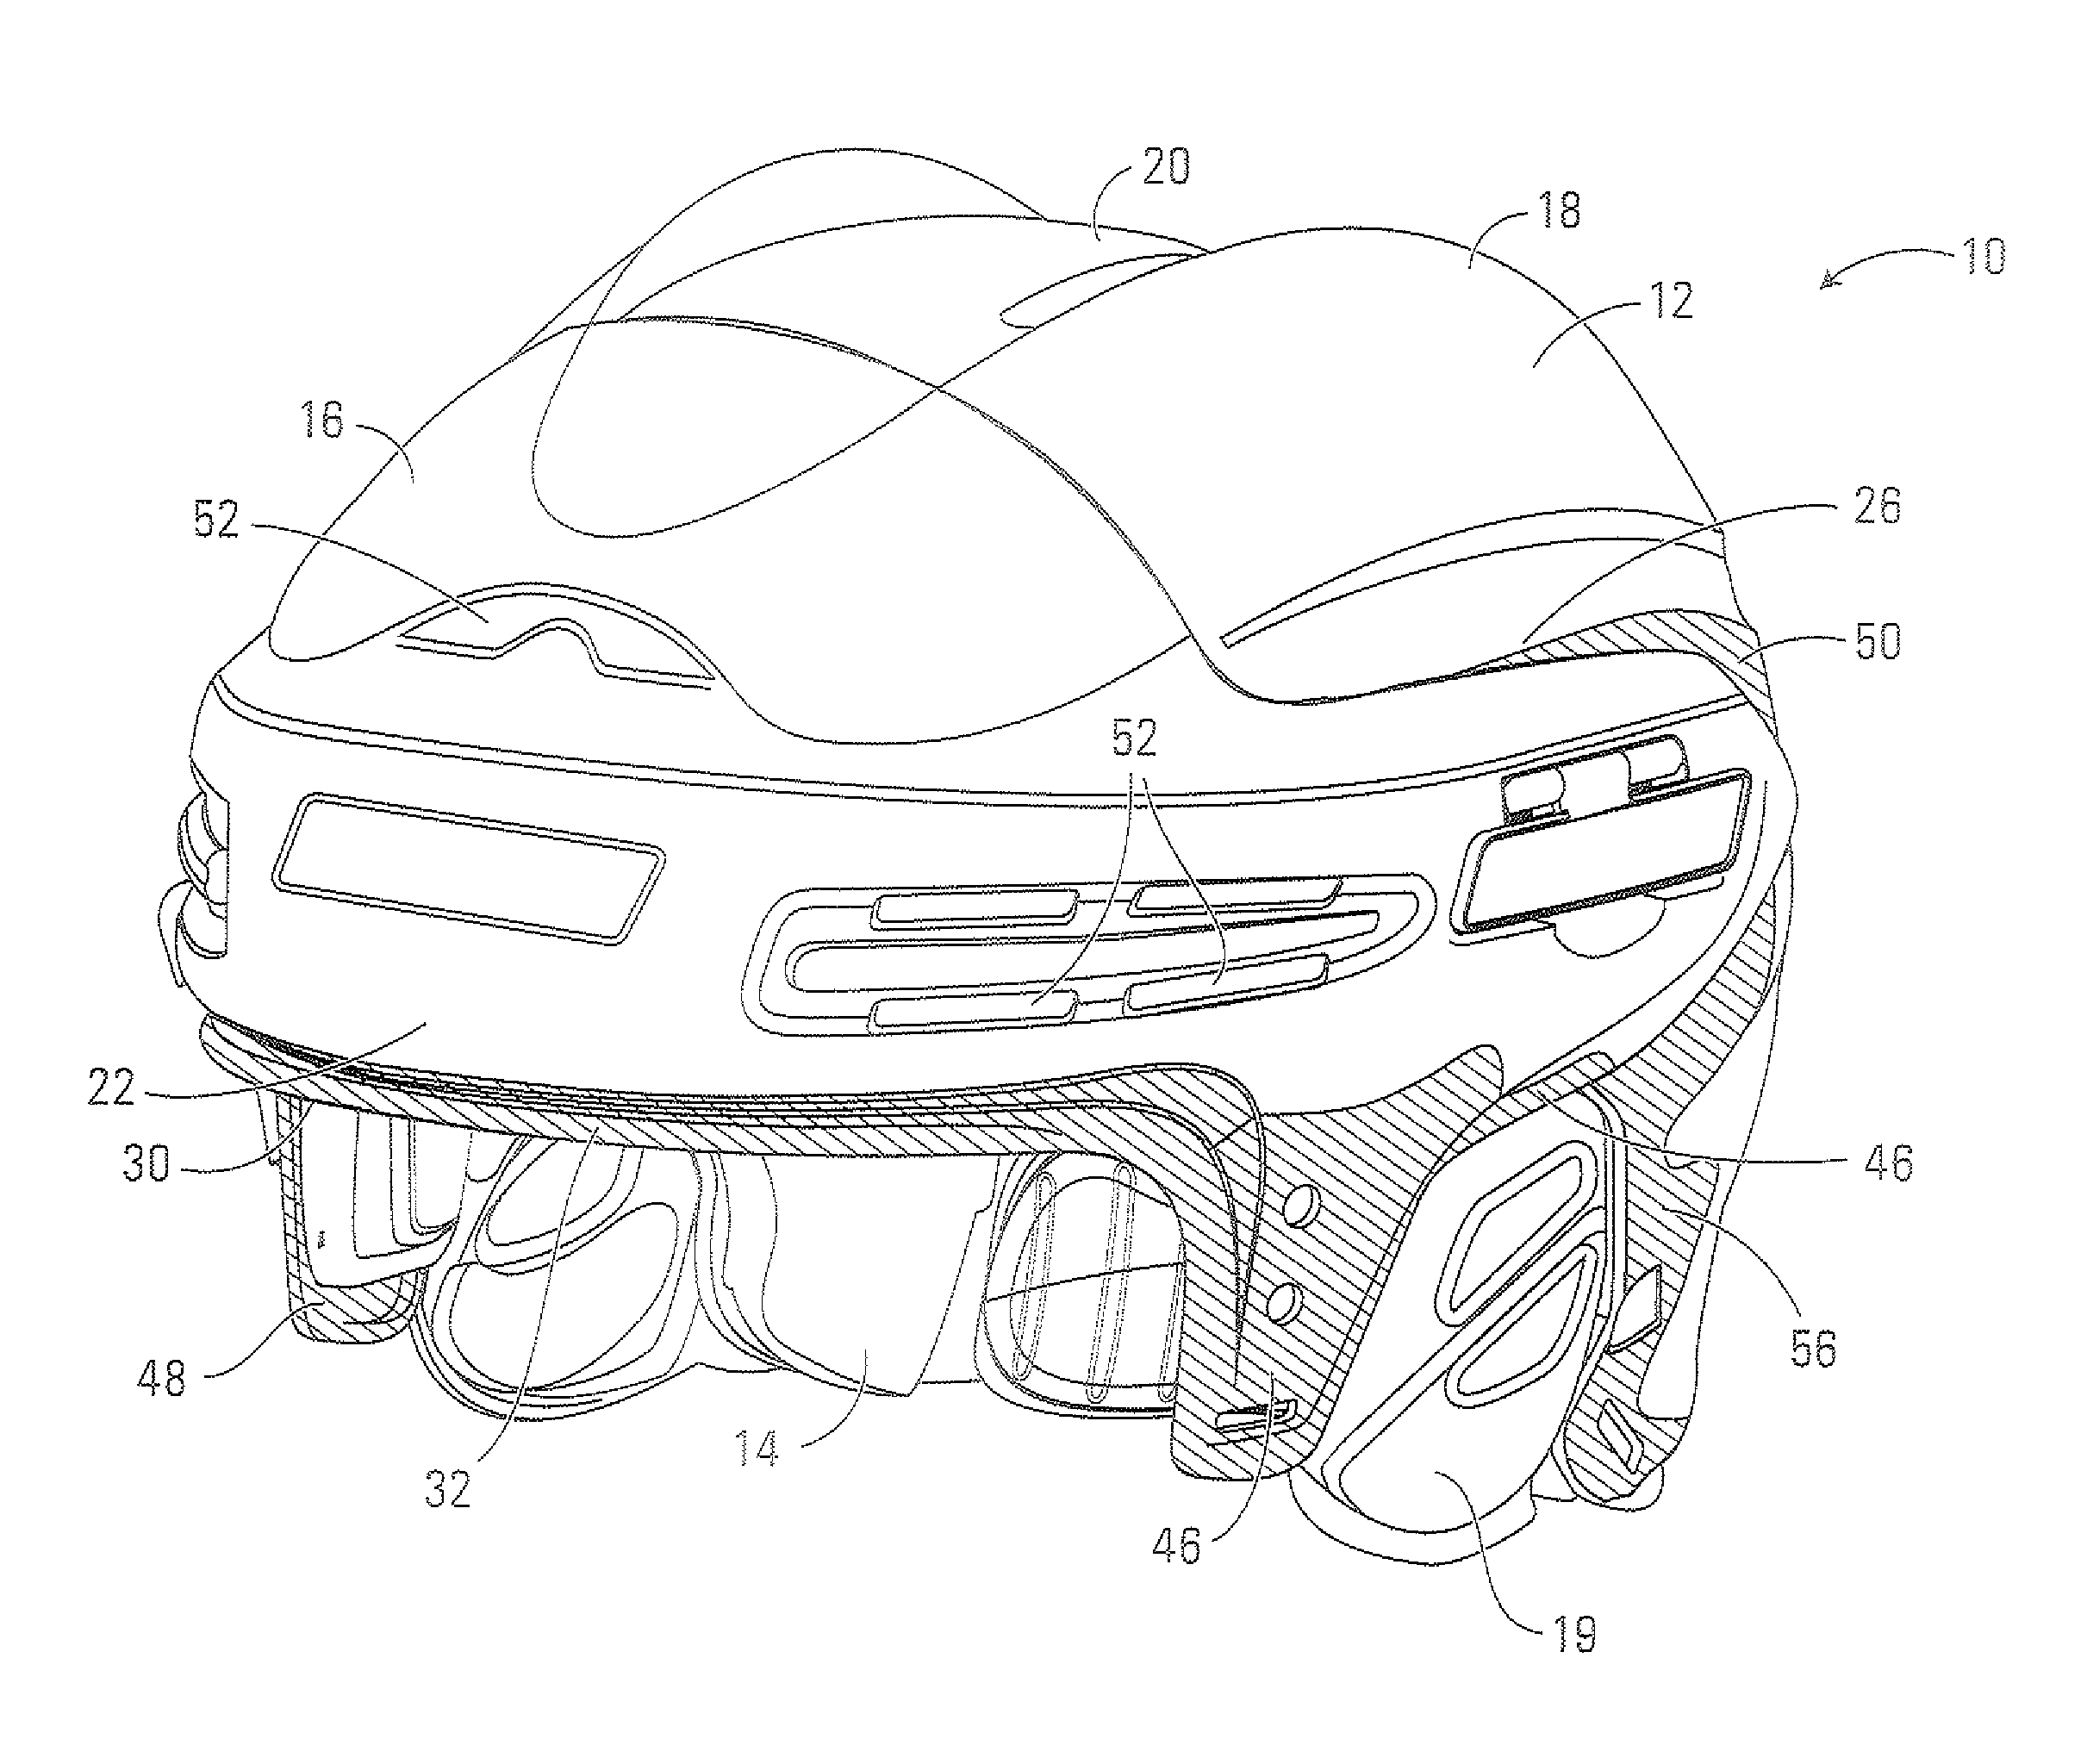 Hockey helmet with an outer shell made of two different materials